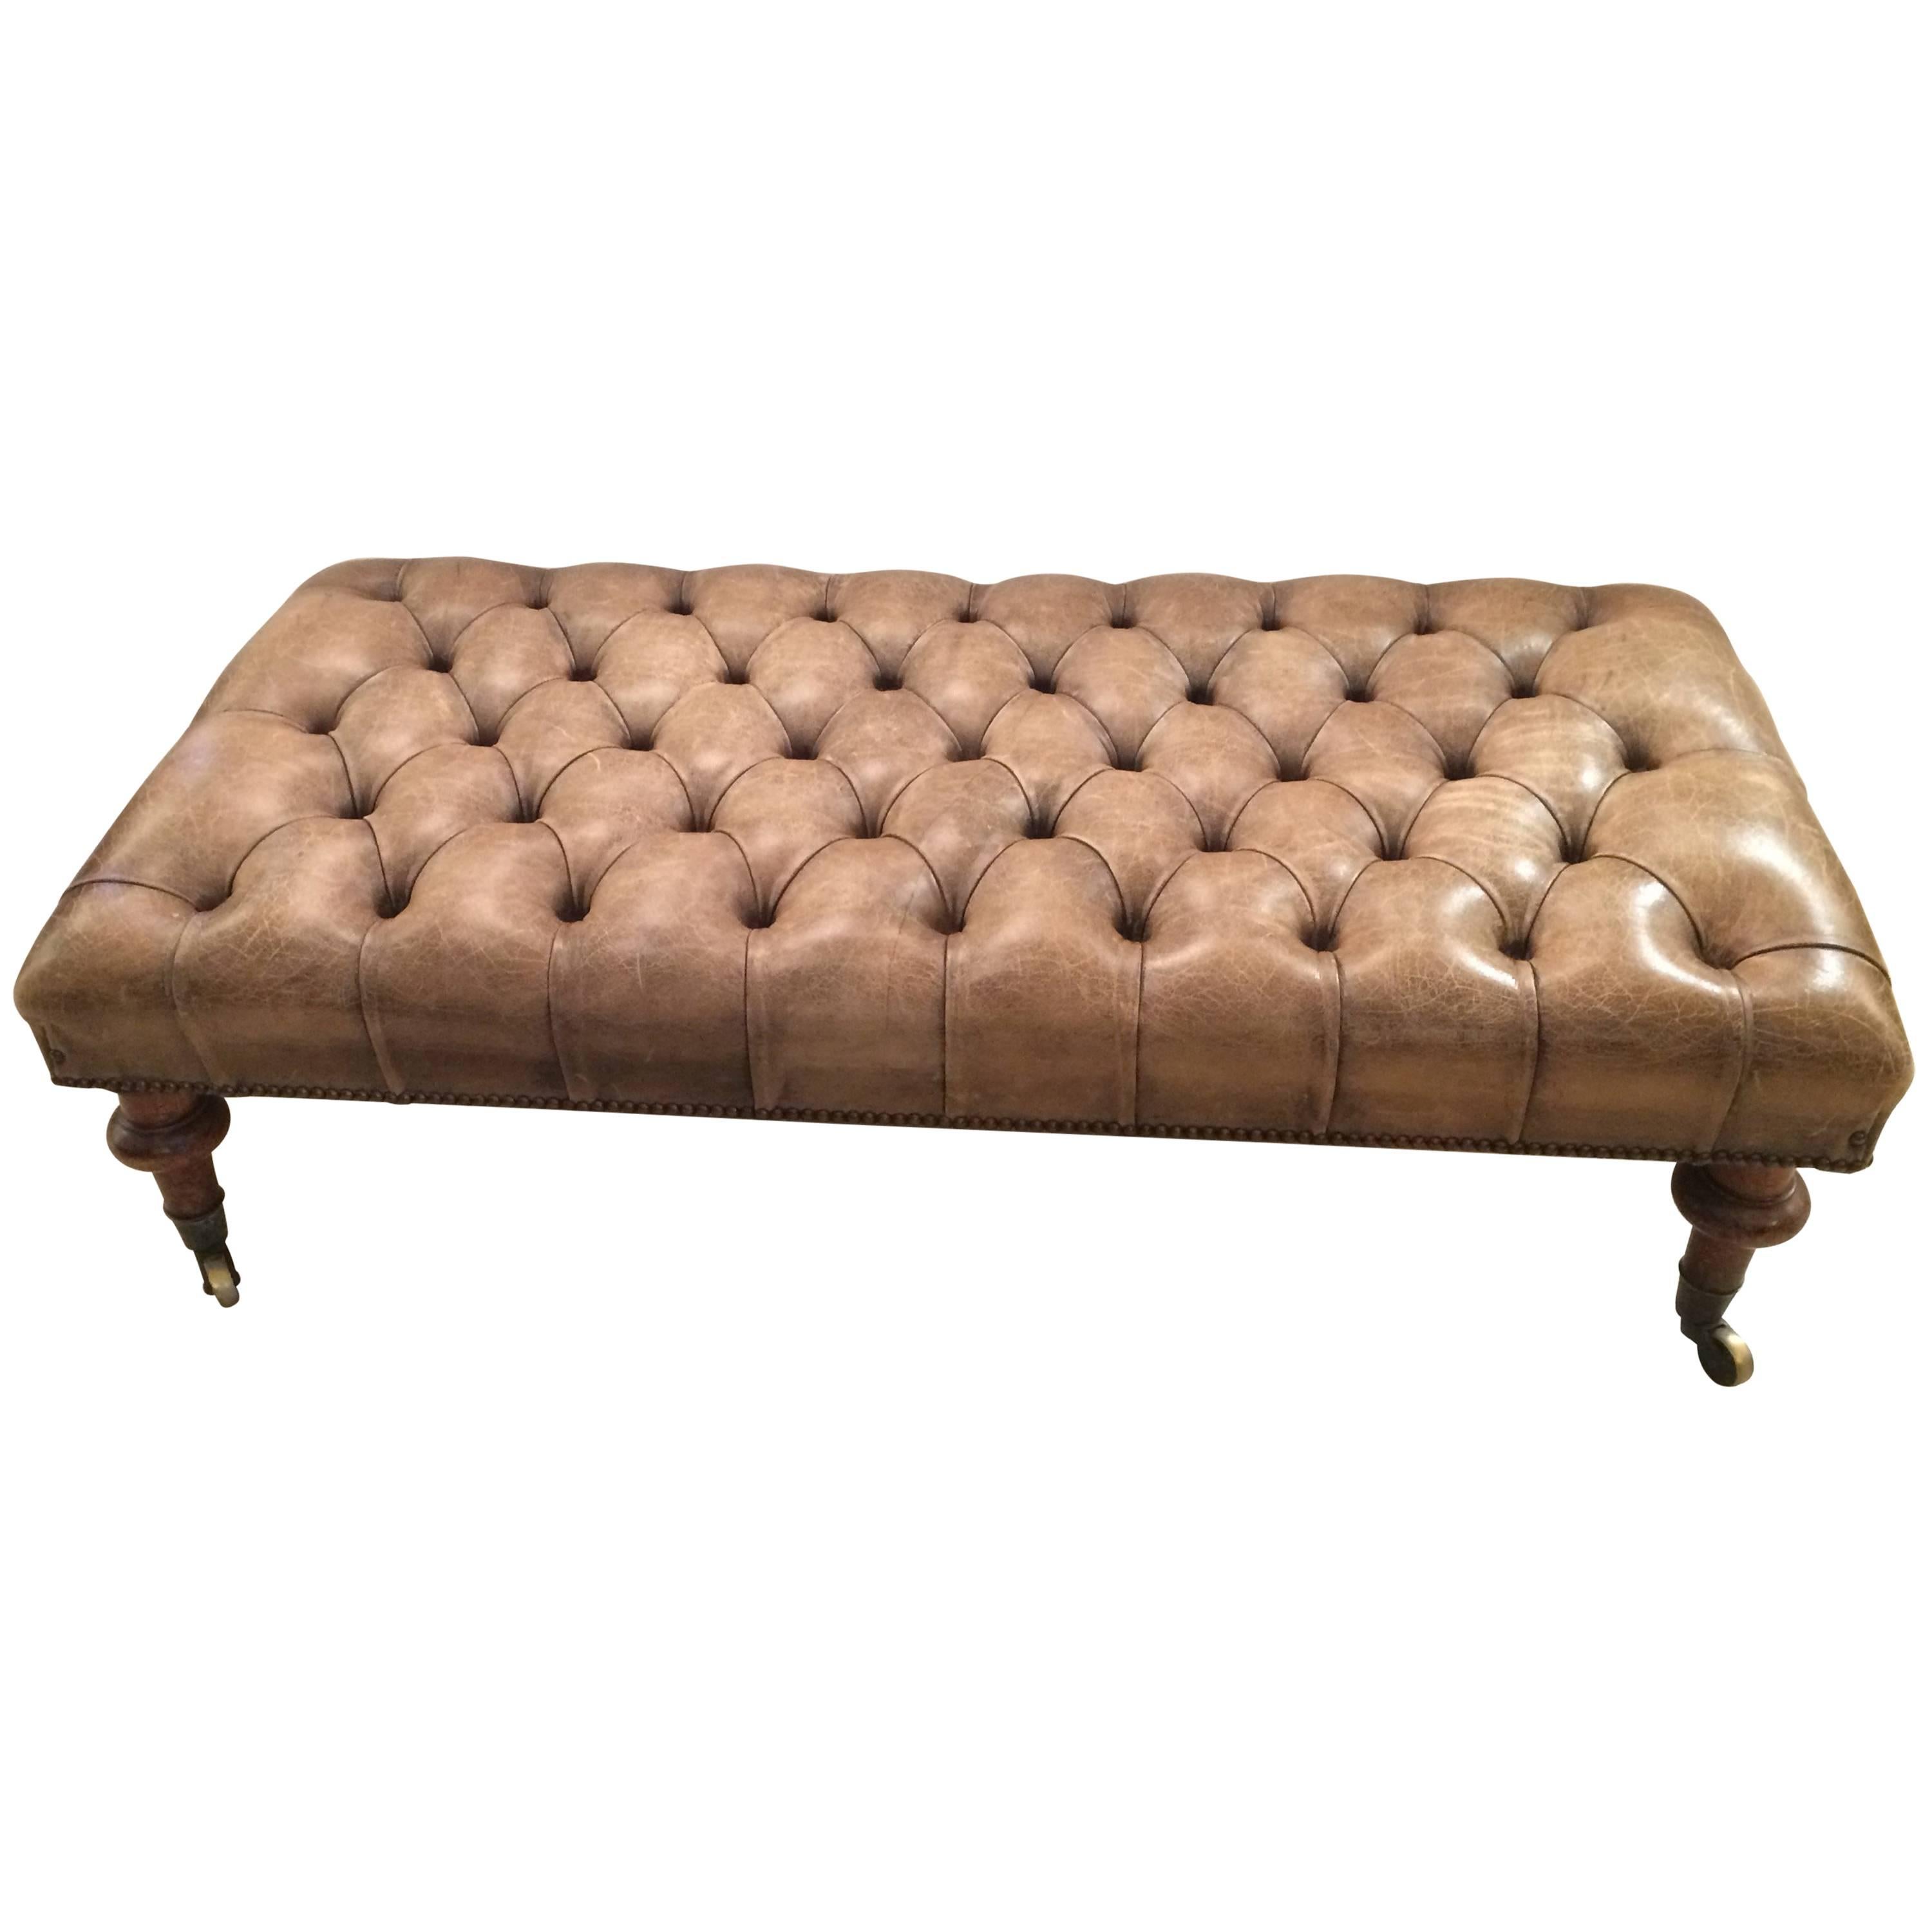 Luscious Antique Distressed Tufted Leather Chesterfield Ottoman Bench